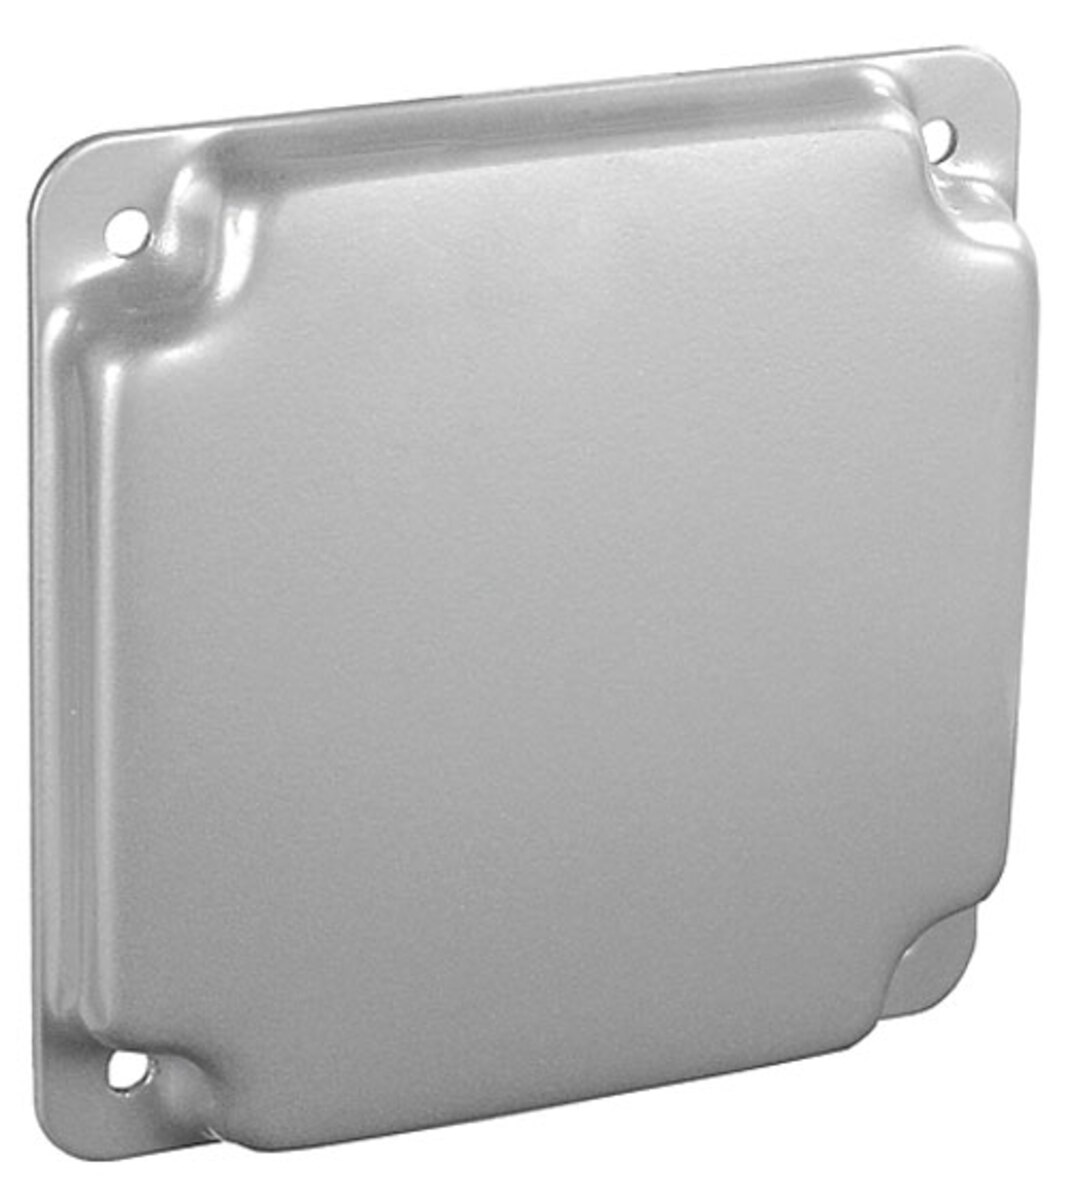 4" Square Industrial Surface Cover, 1/2" Raised - Blank